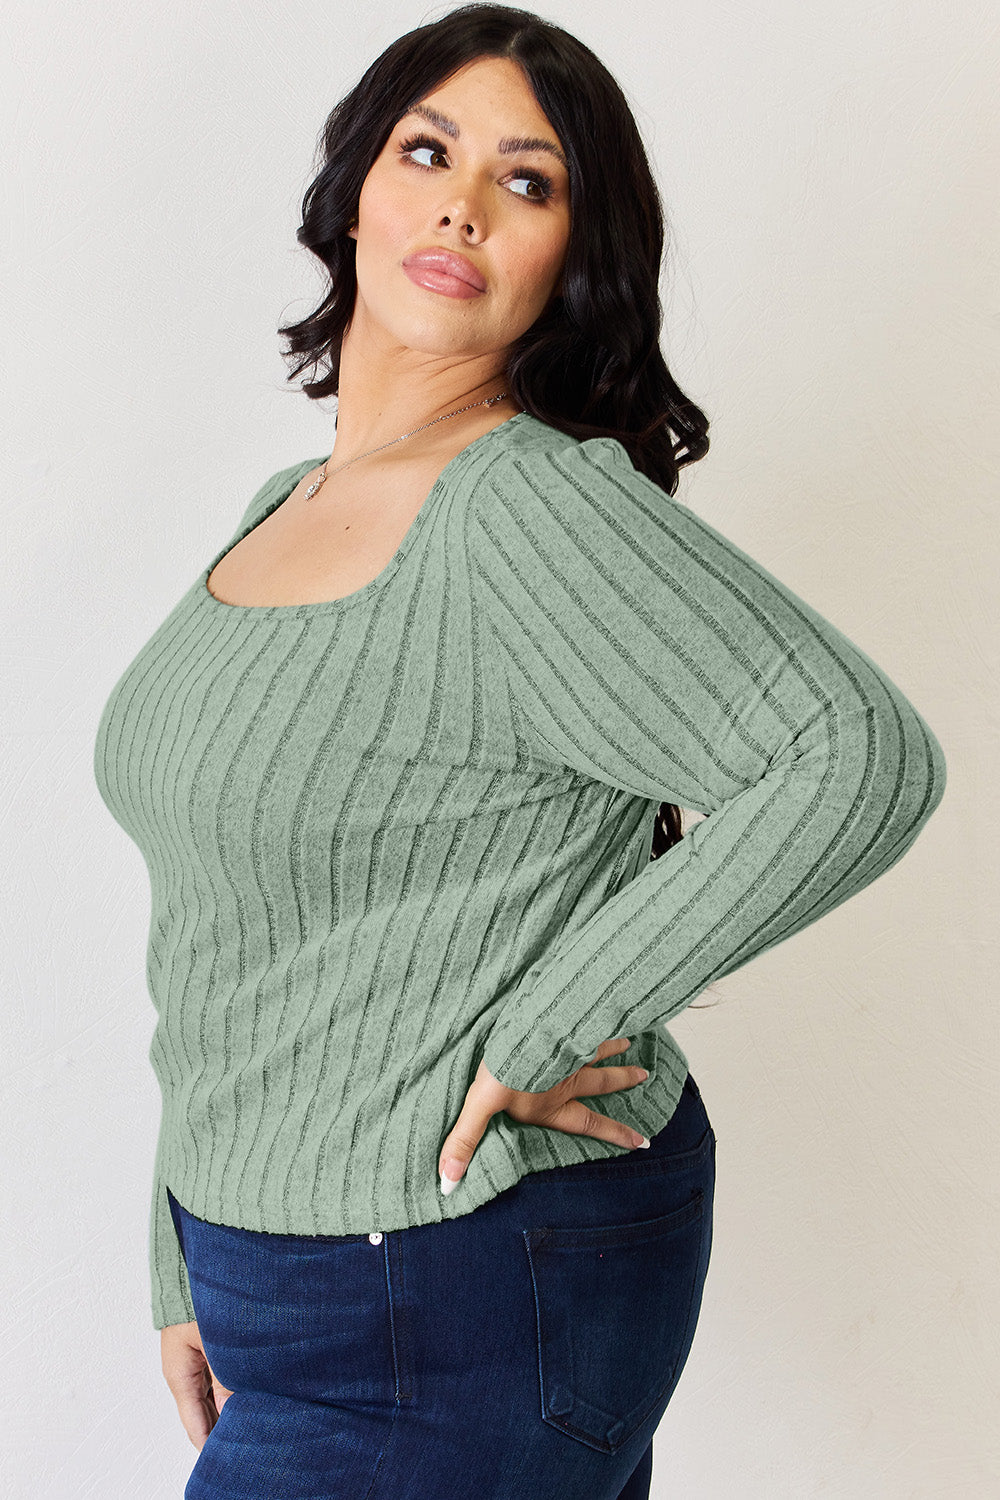 Basic Bae Full Size Ribbed Long Sleeve T-Shirt [ click for additional colors]